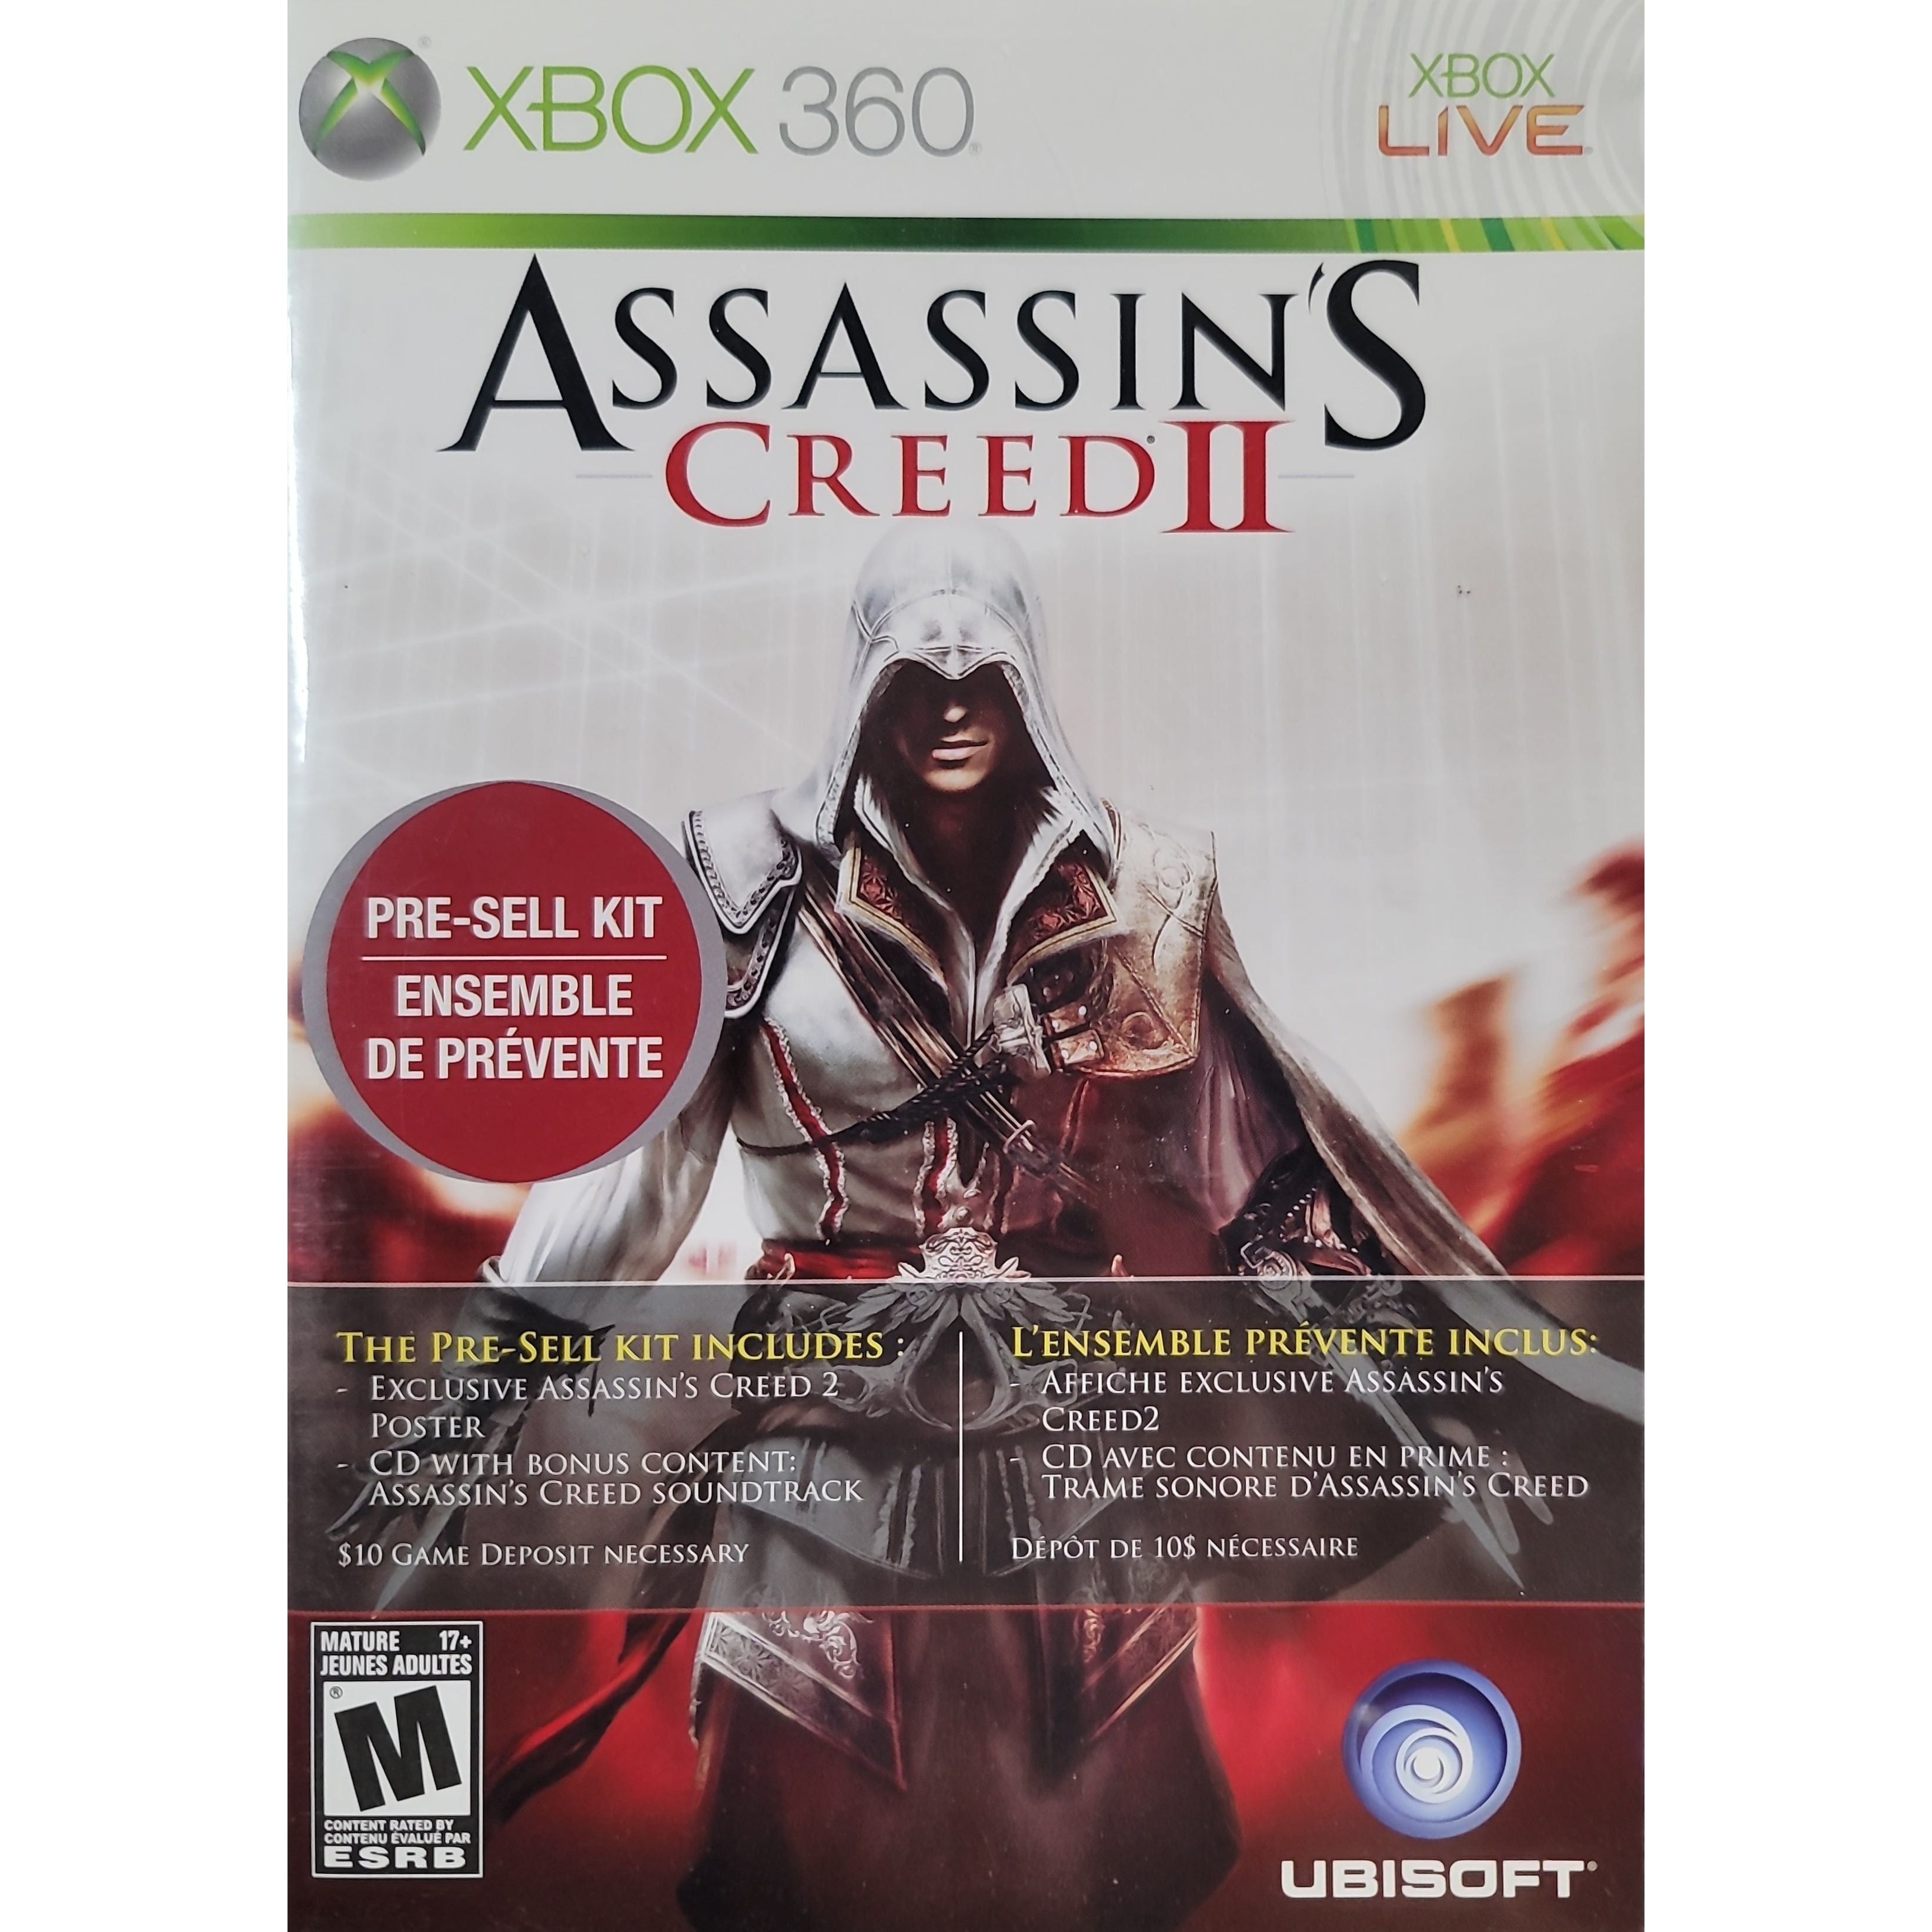 XBOX 360 - Assassin's Creed II Pre-Sell Kit (No Poster)